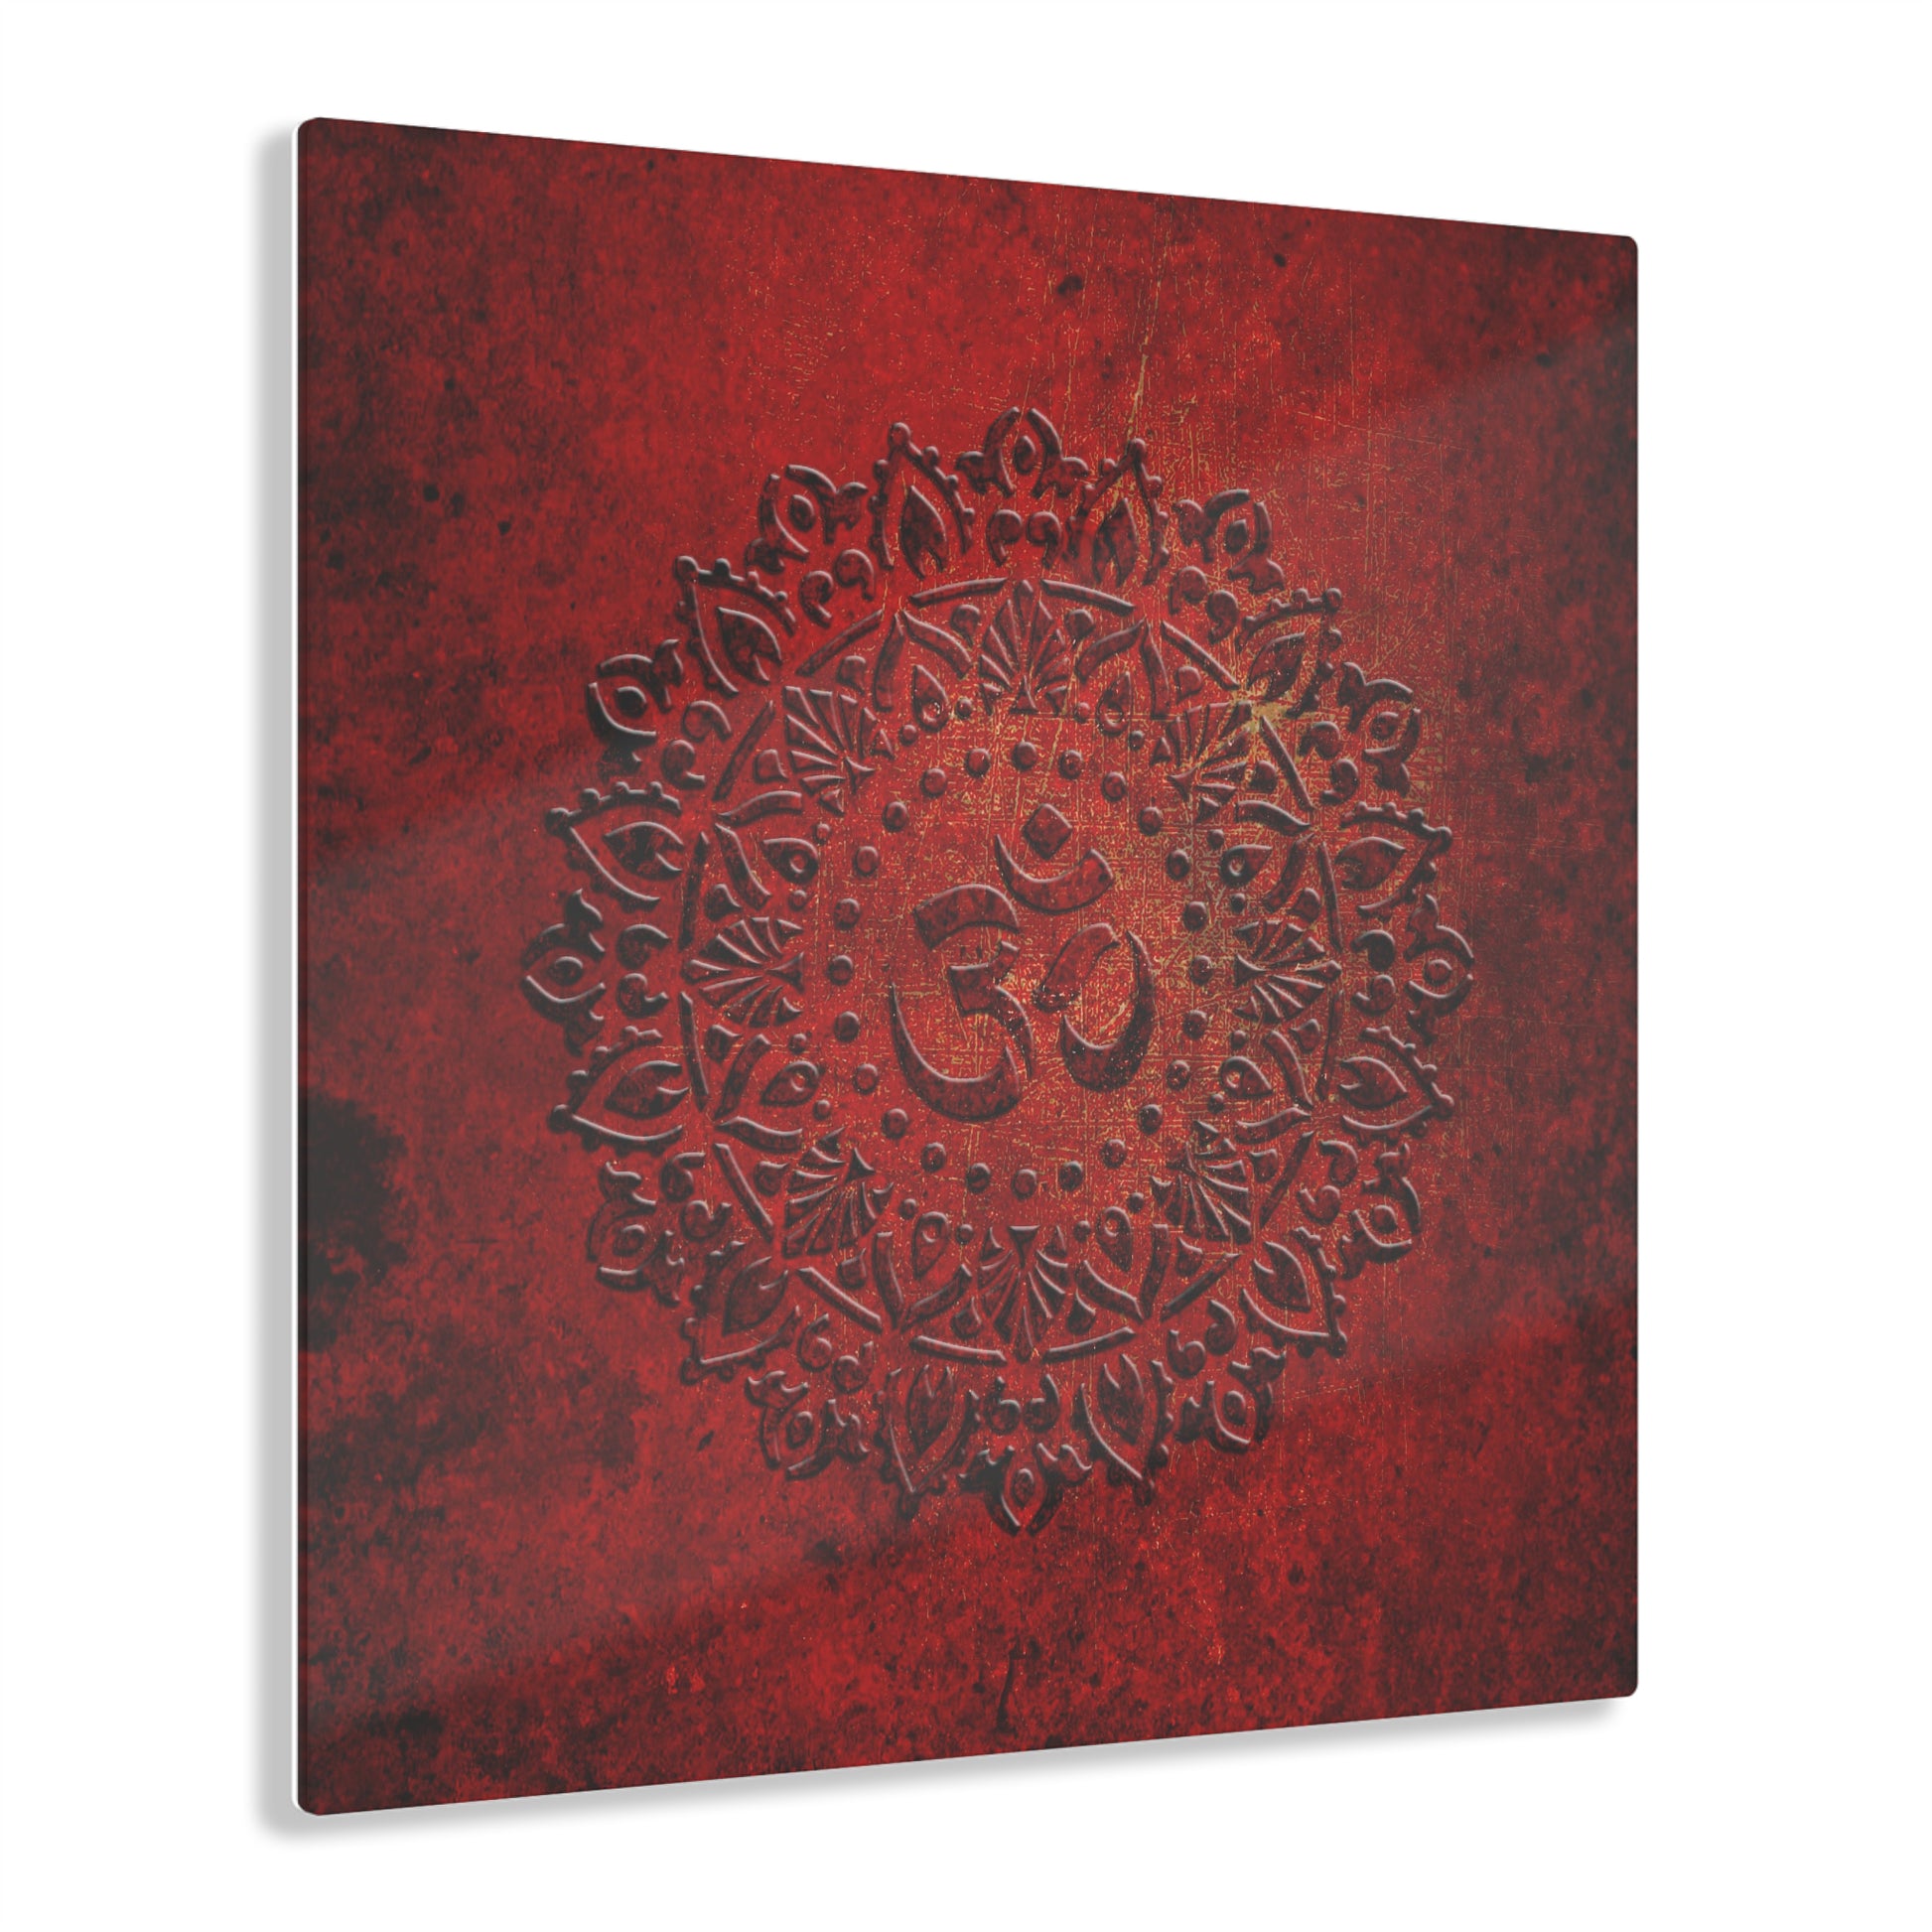 Om Symbol Mandala Style on Lava Red Background Printed on a Crystal Clear Acrylic Panel